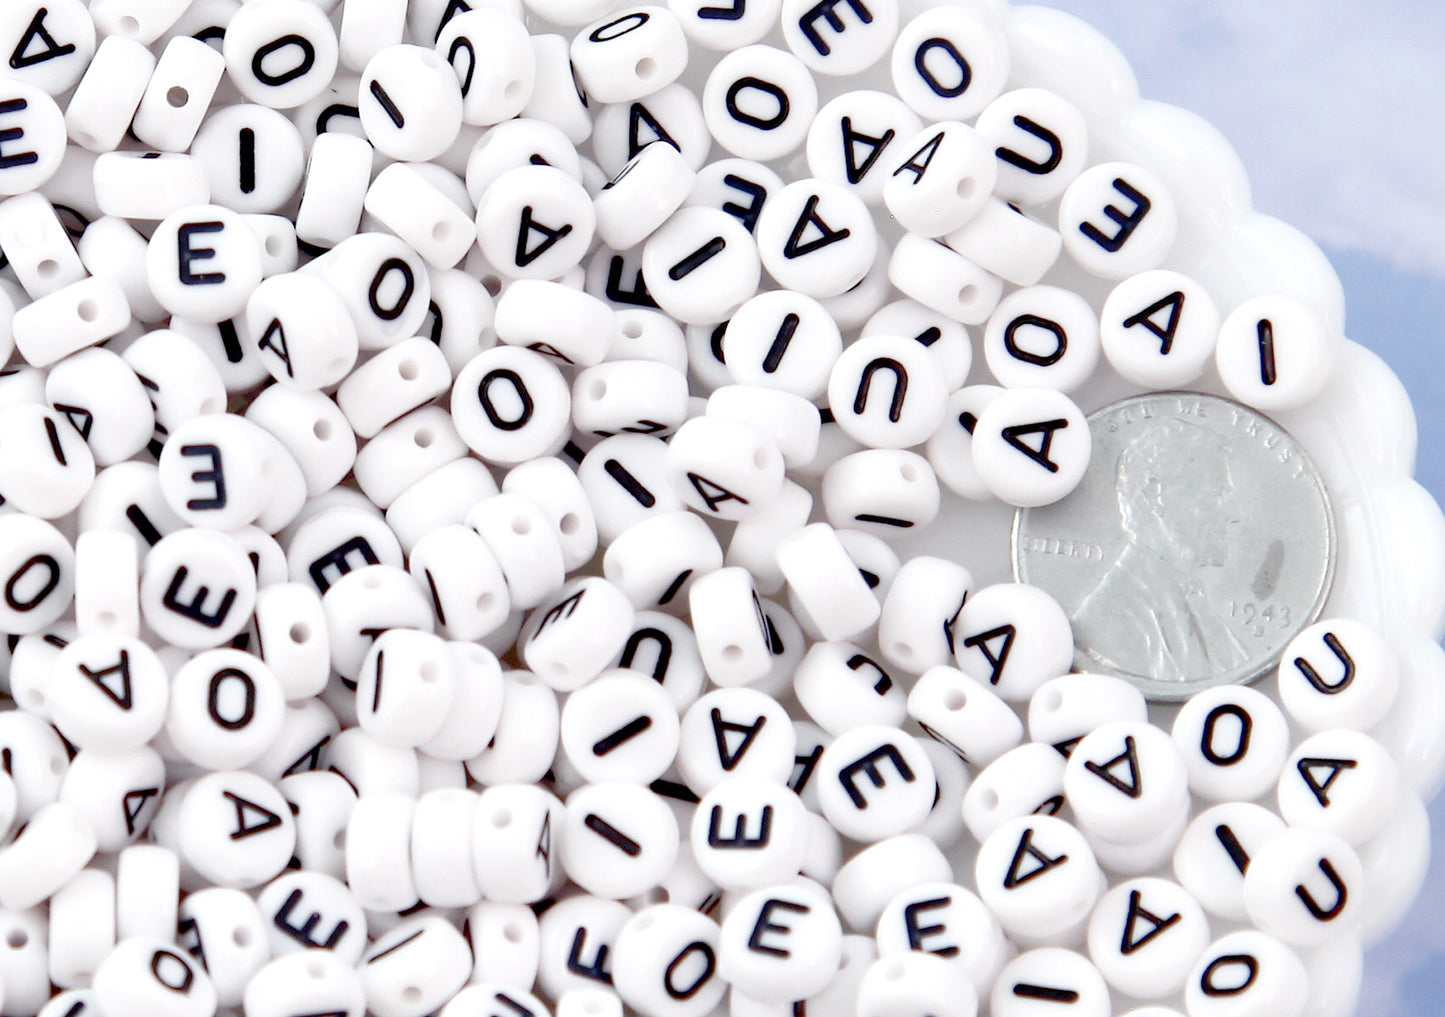 Vowels Only Letter Beads - 7mm Little Round White Vowel Alphabet Acrylic or Resin Beads - 300 pc set